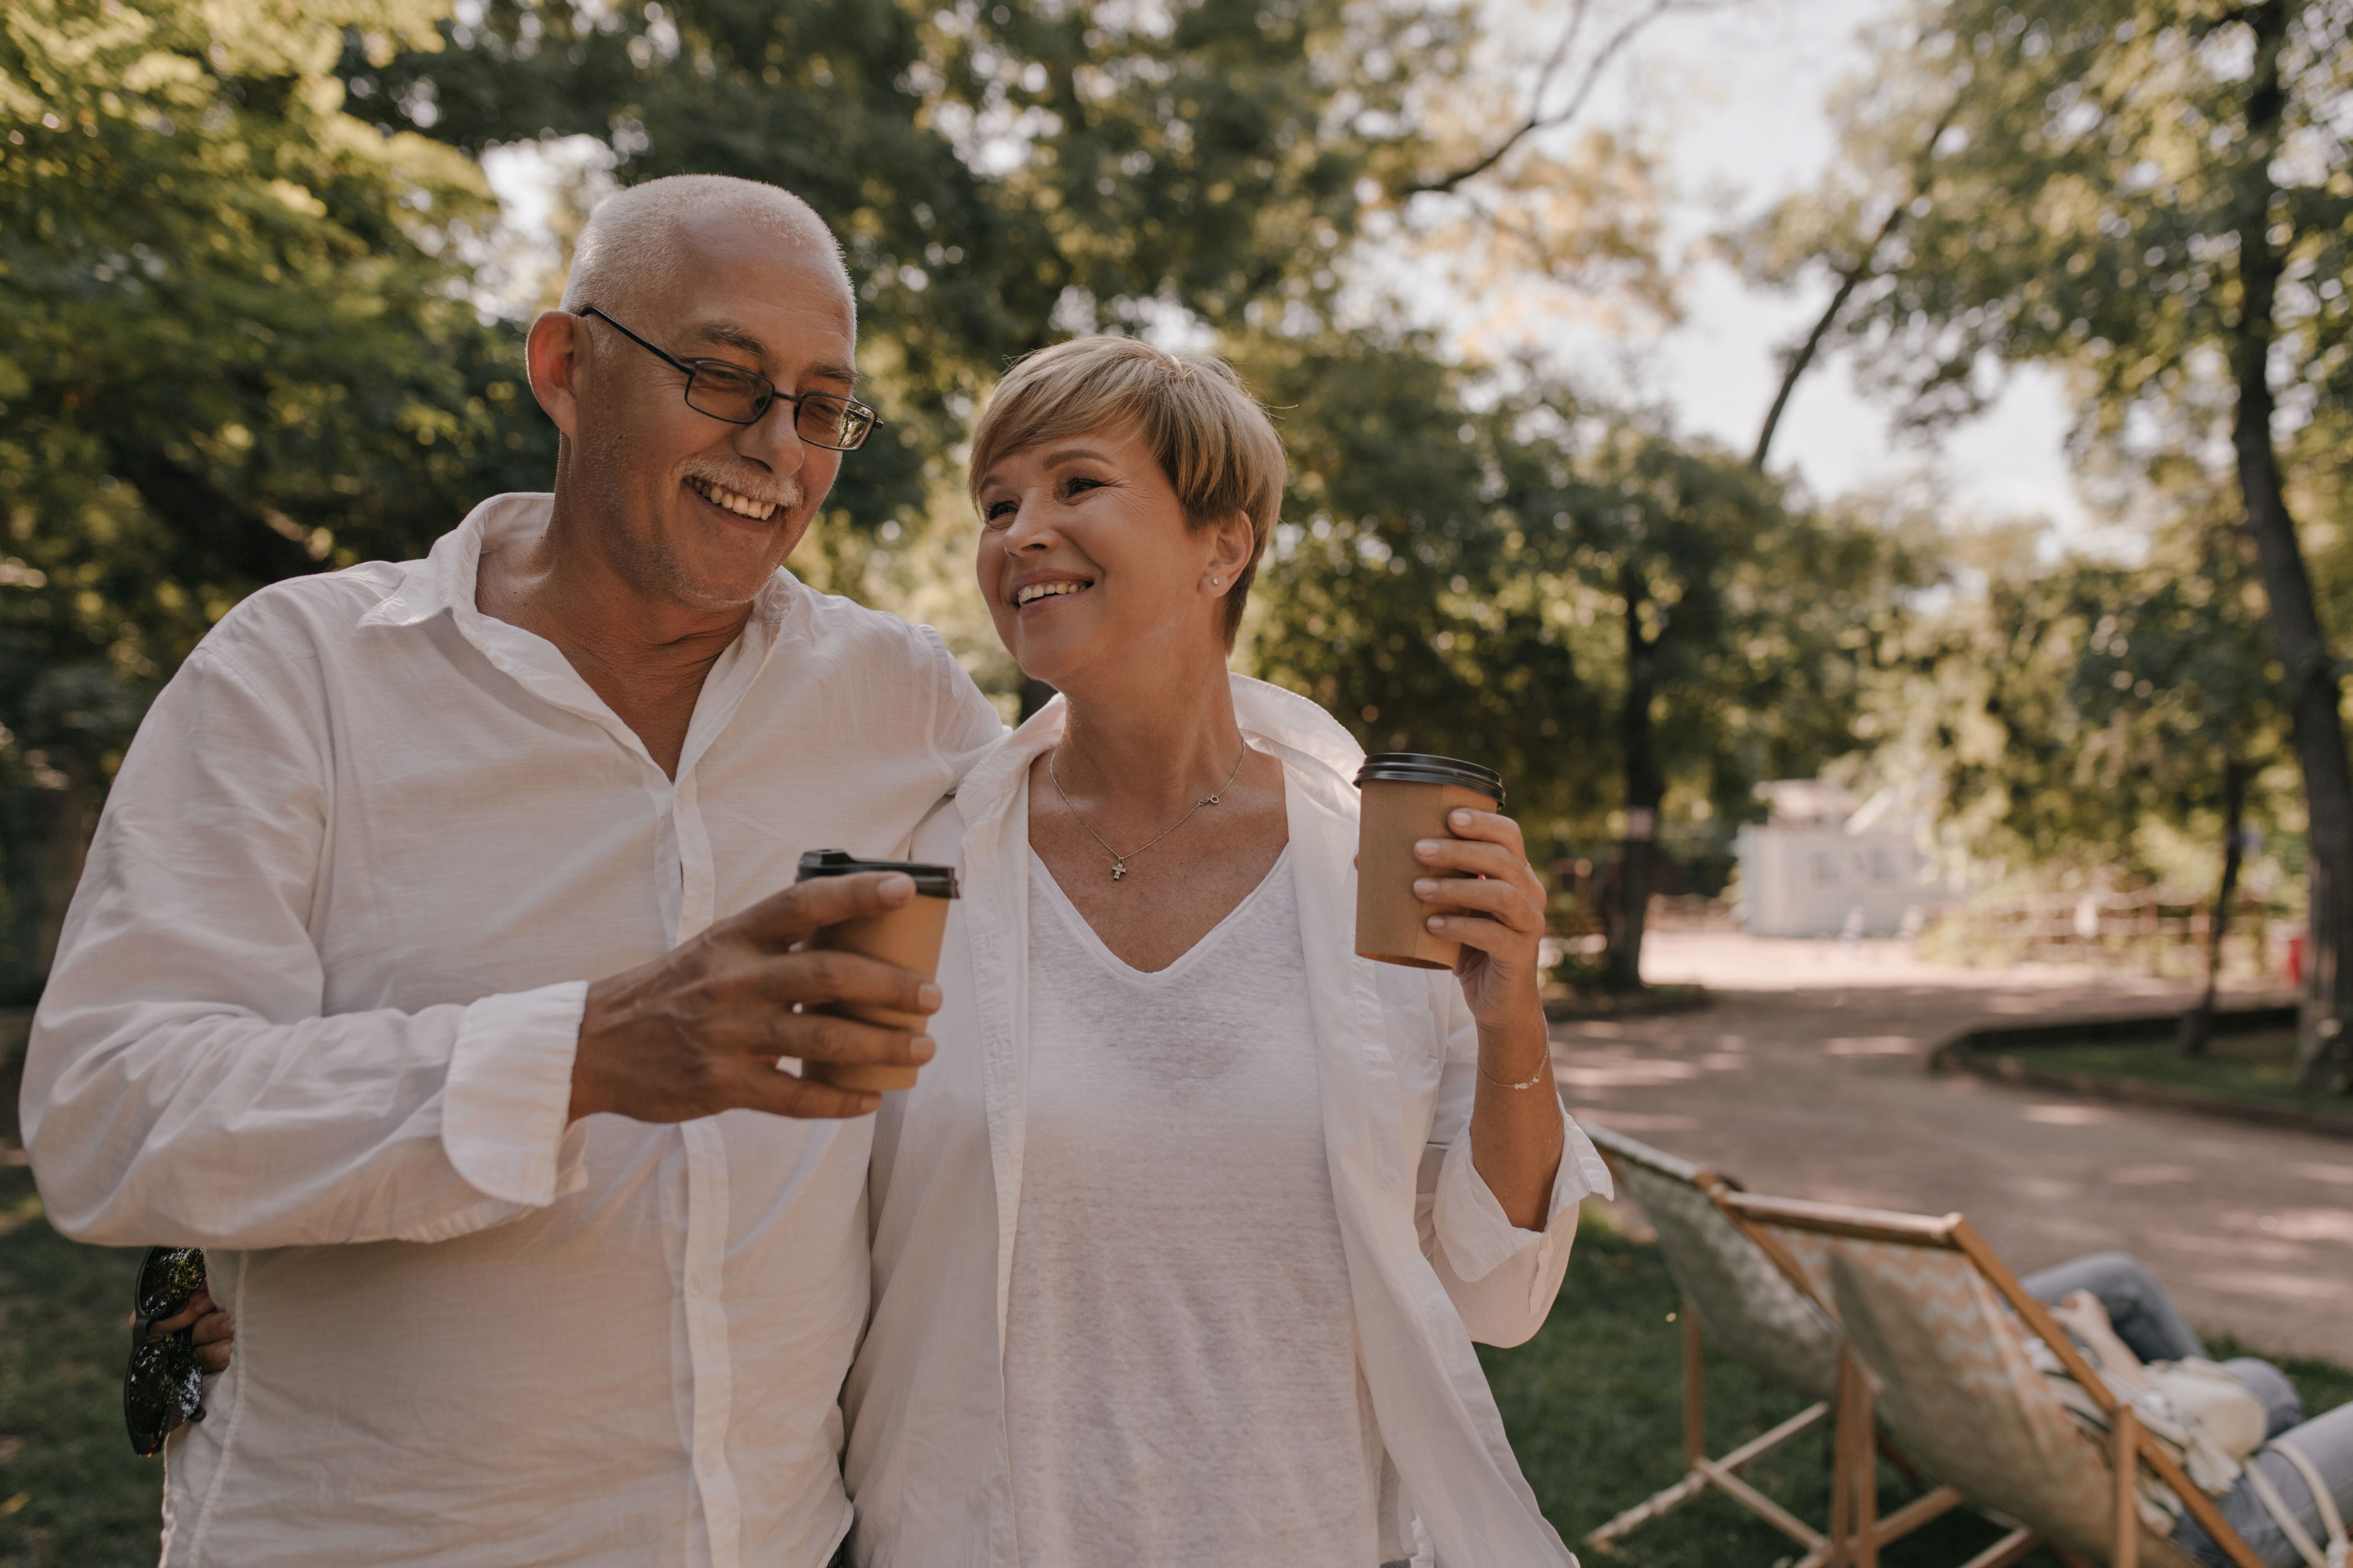 grey haired man with eyeglasses in white shirt smiling and posing with cap of tea and stylish woman in light outfit outdoor